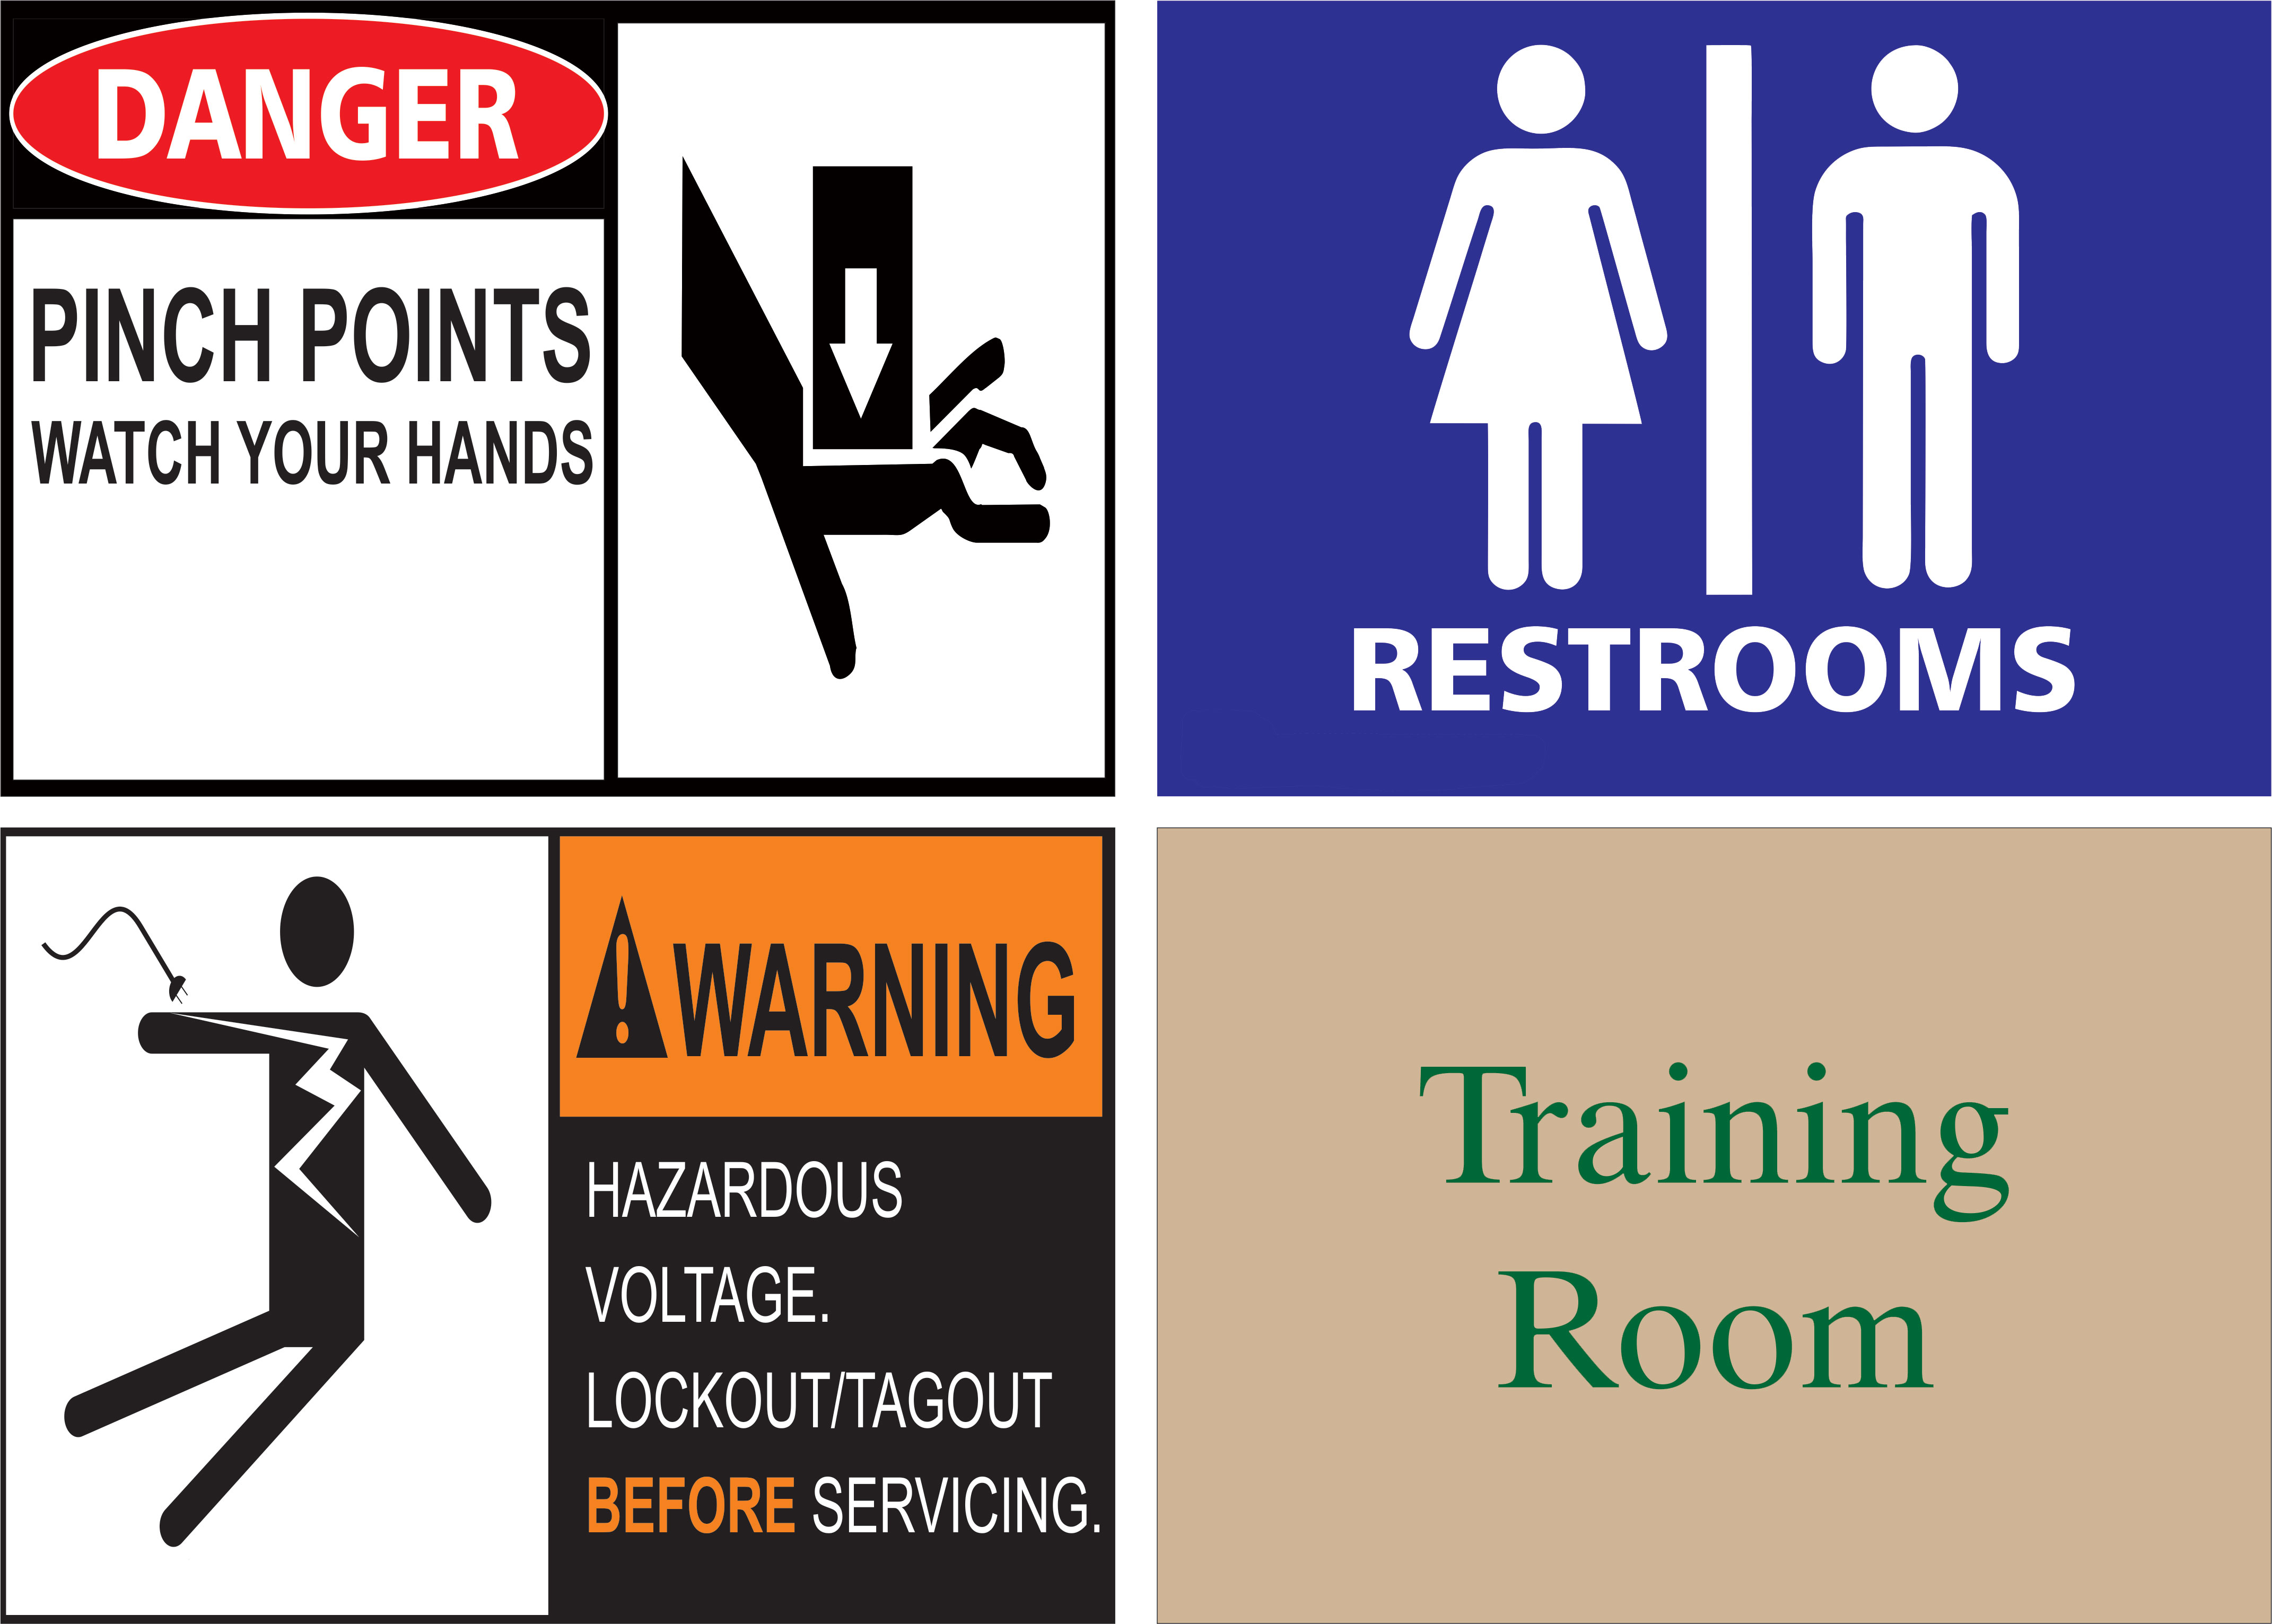 Examples of signs